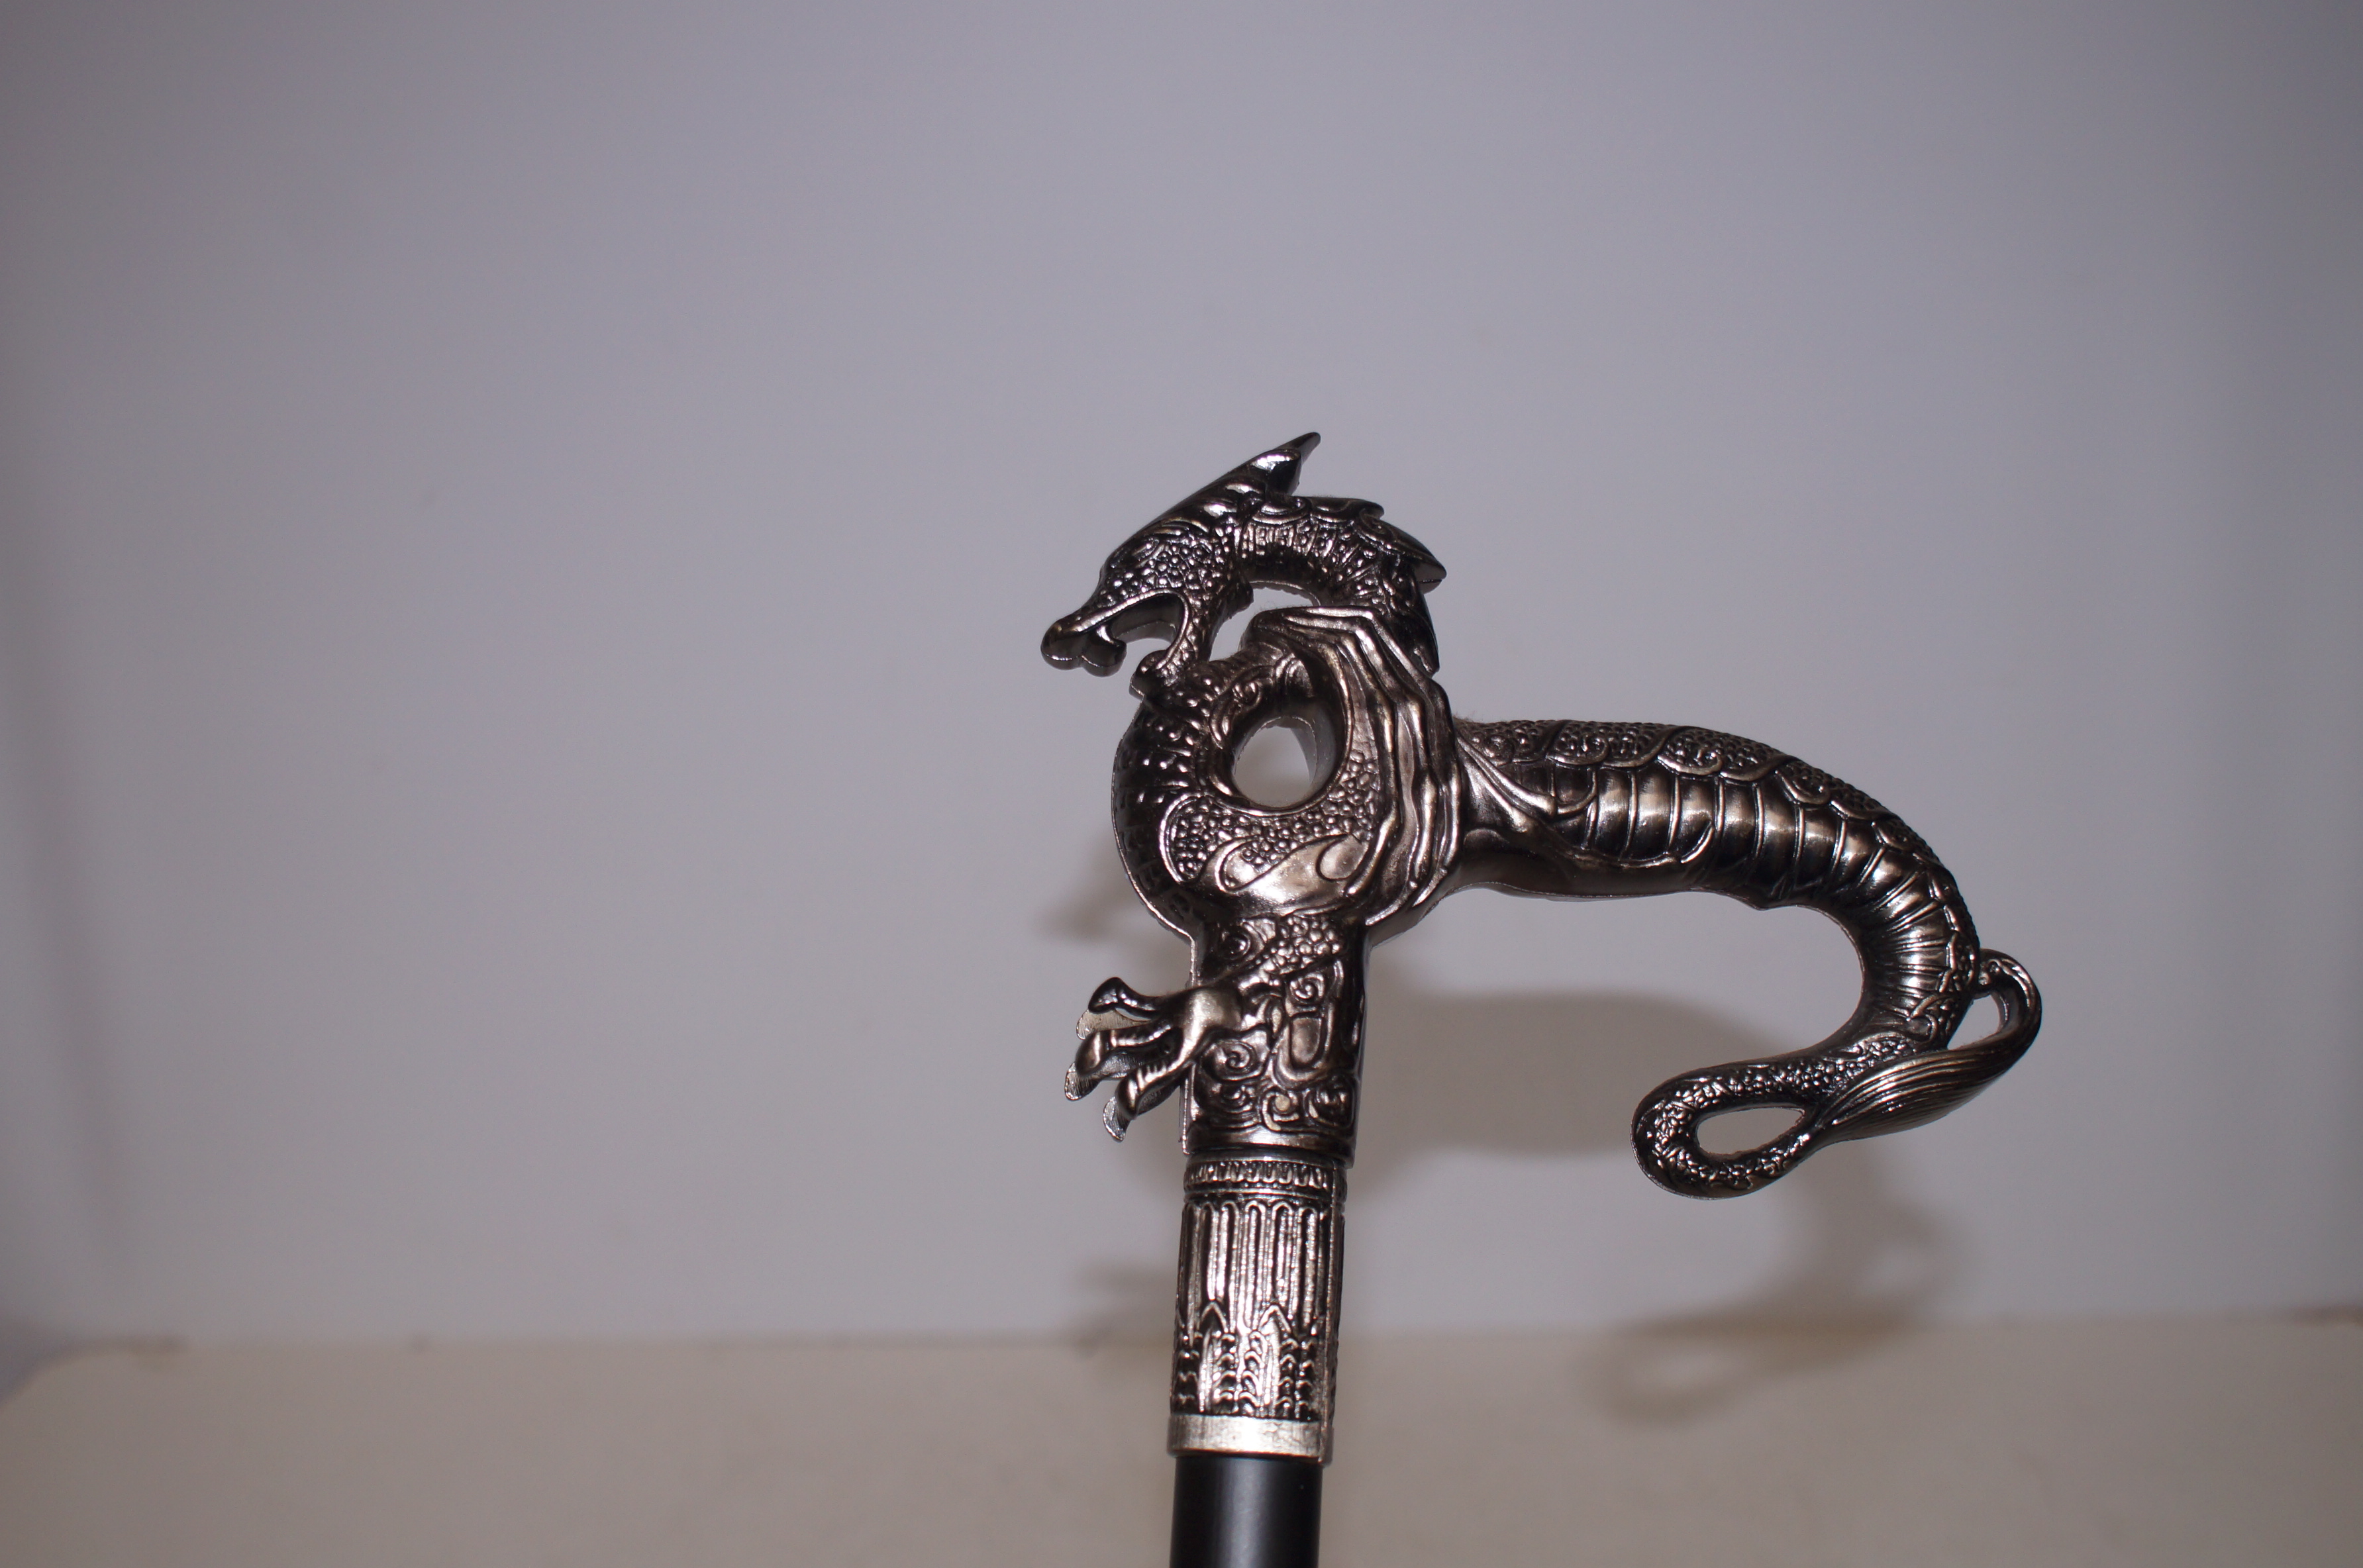 Nemesis now dragon handled swagger cane